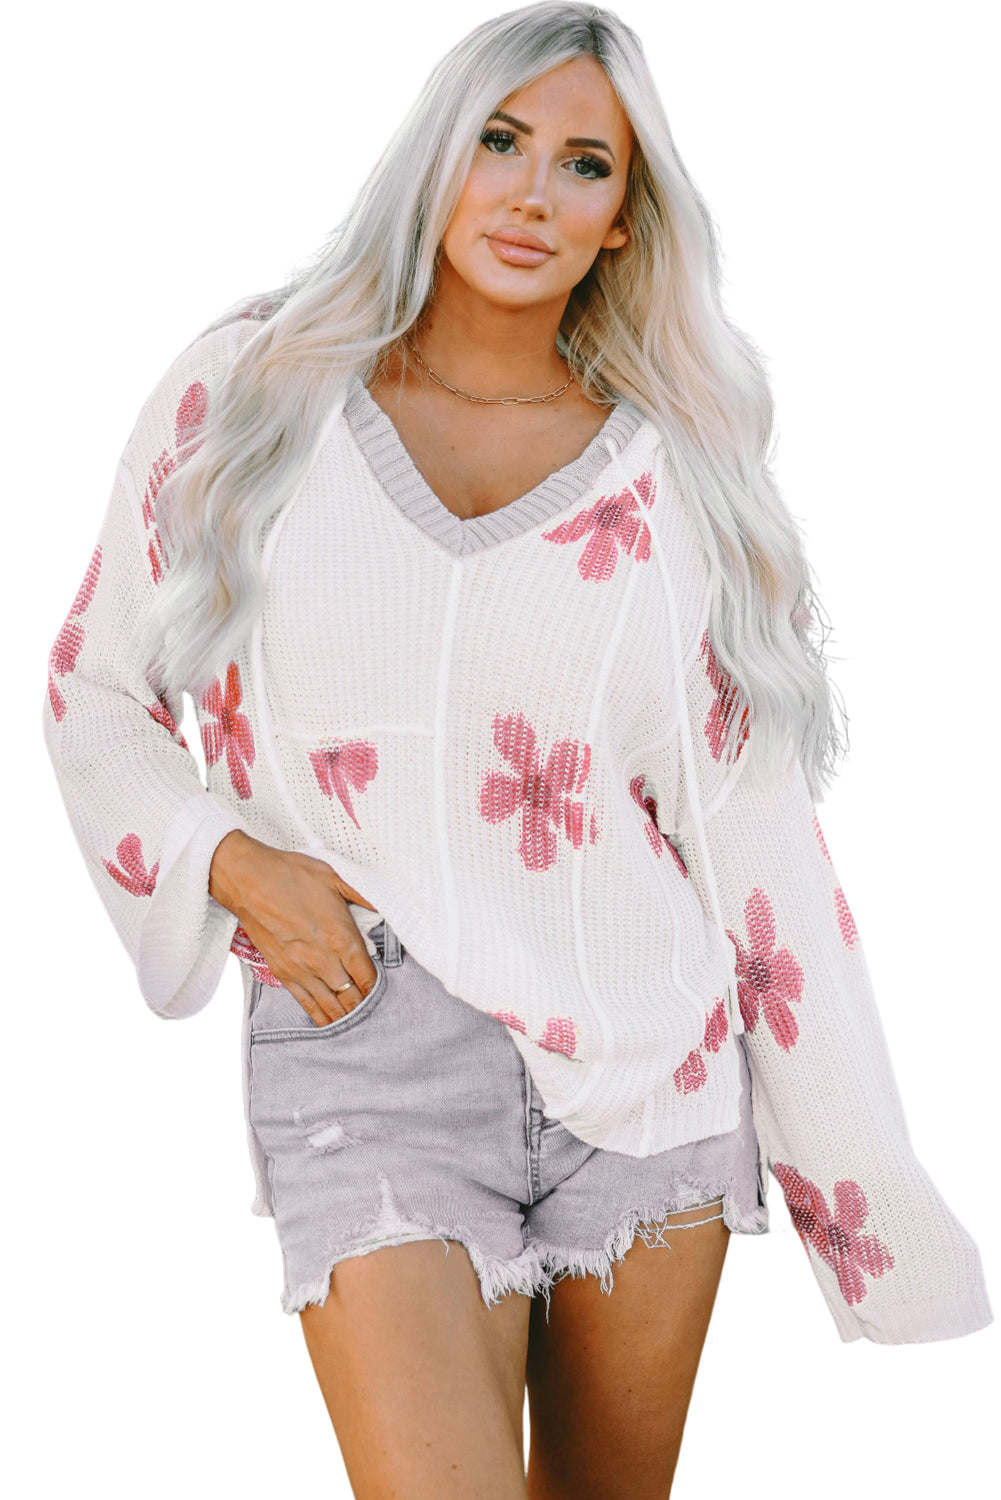 Floral Print Lightweight Knit Hooded Sweater (2 Colors)